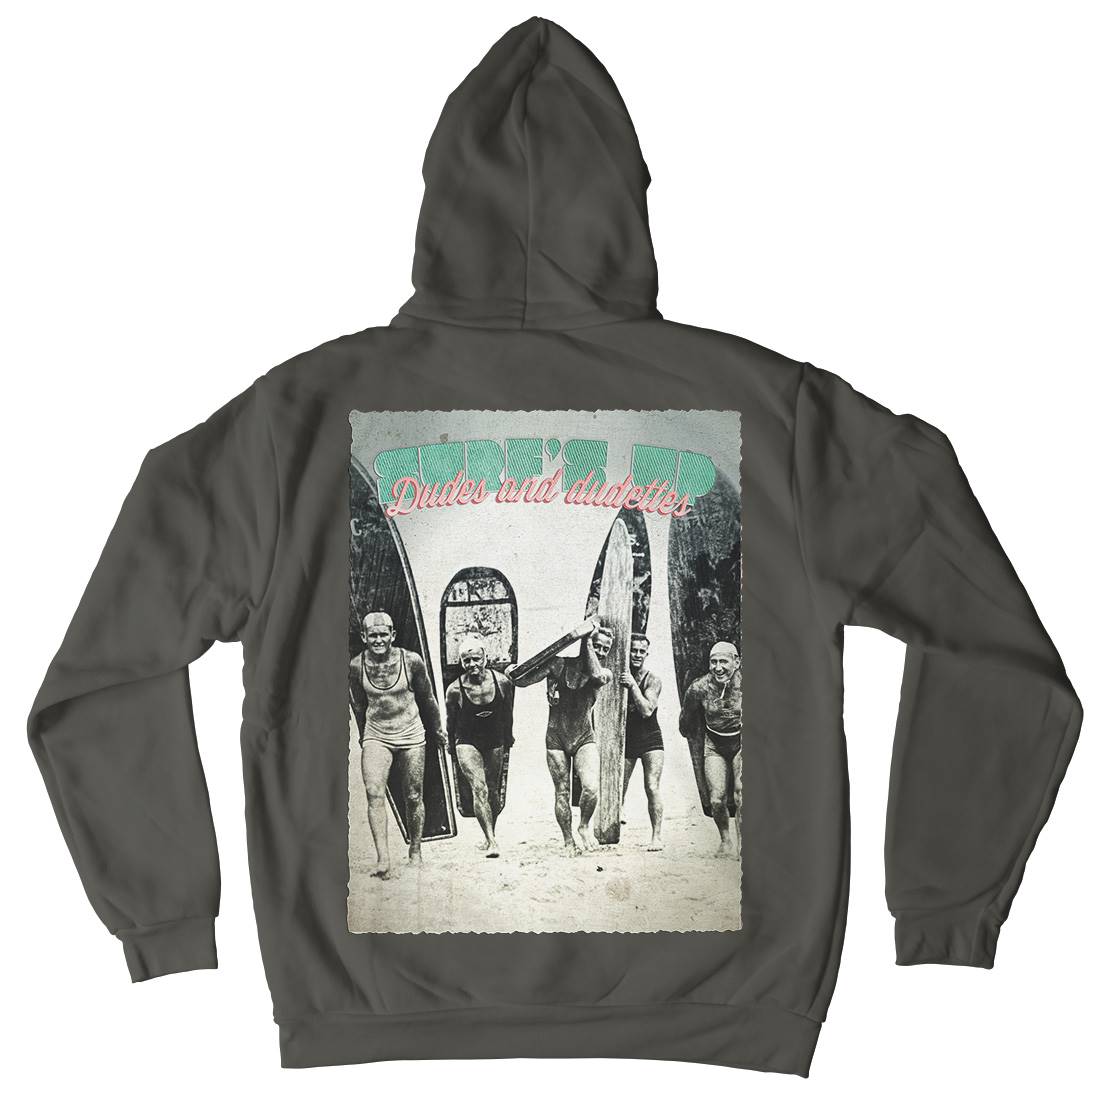 In The Usa Kids Crew Neck Hoodie Surf A917